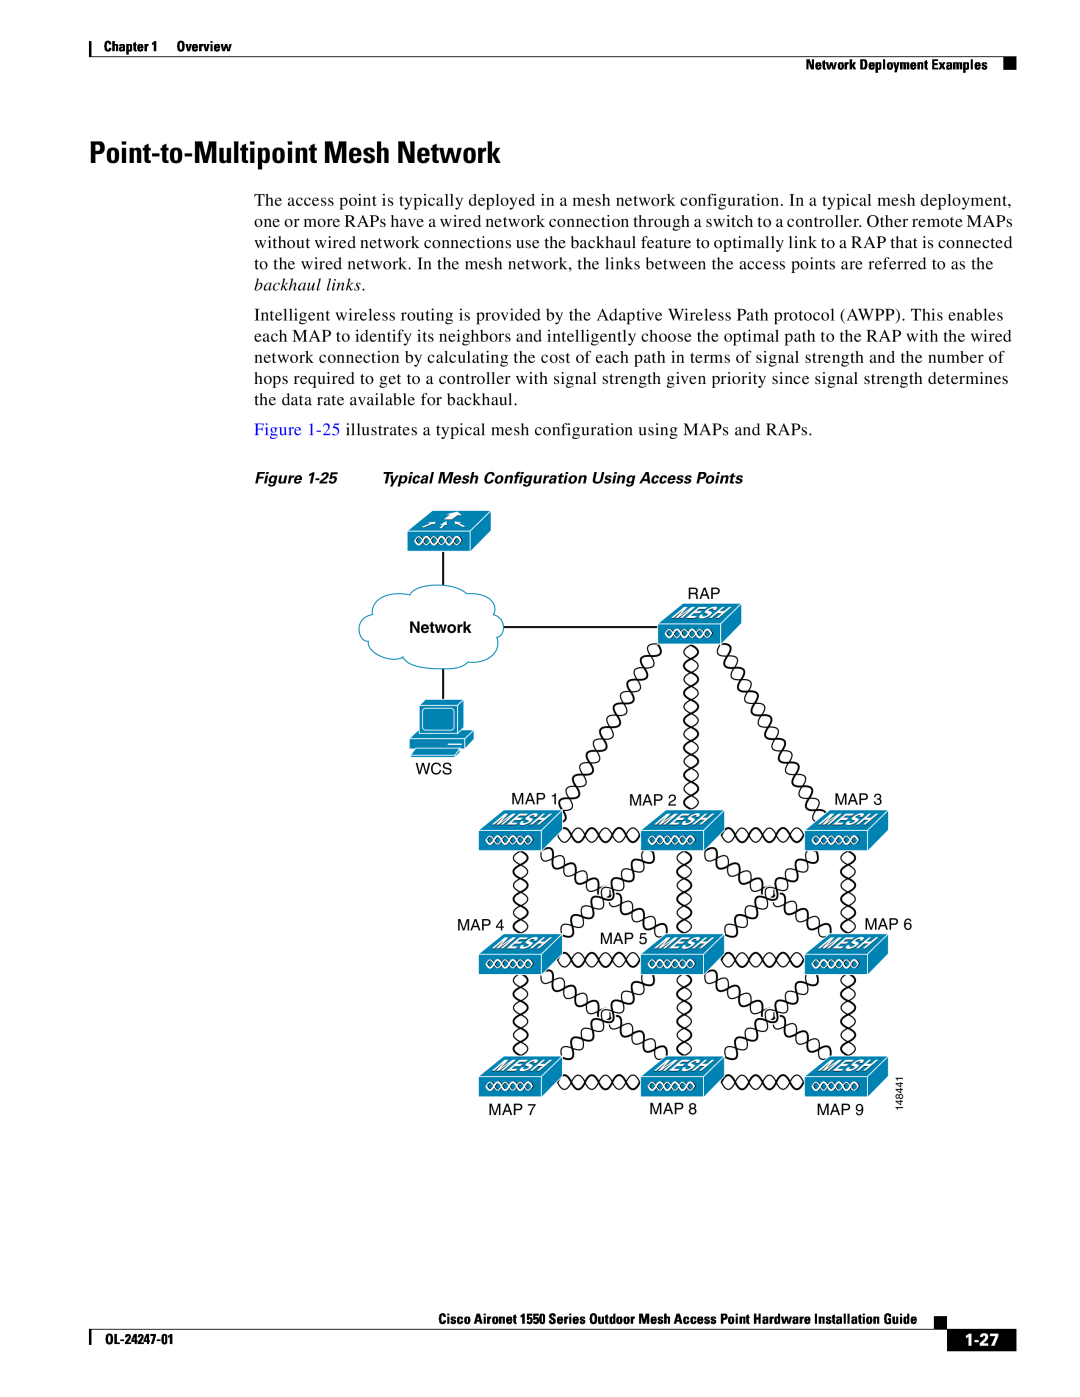 Cisco Systems AIRCAP1552EAK9RF Point-to-Multipoint Mesh Network, 1-27, 25 Typical Mesh Configuration Using Access Points 